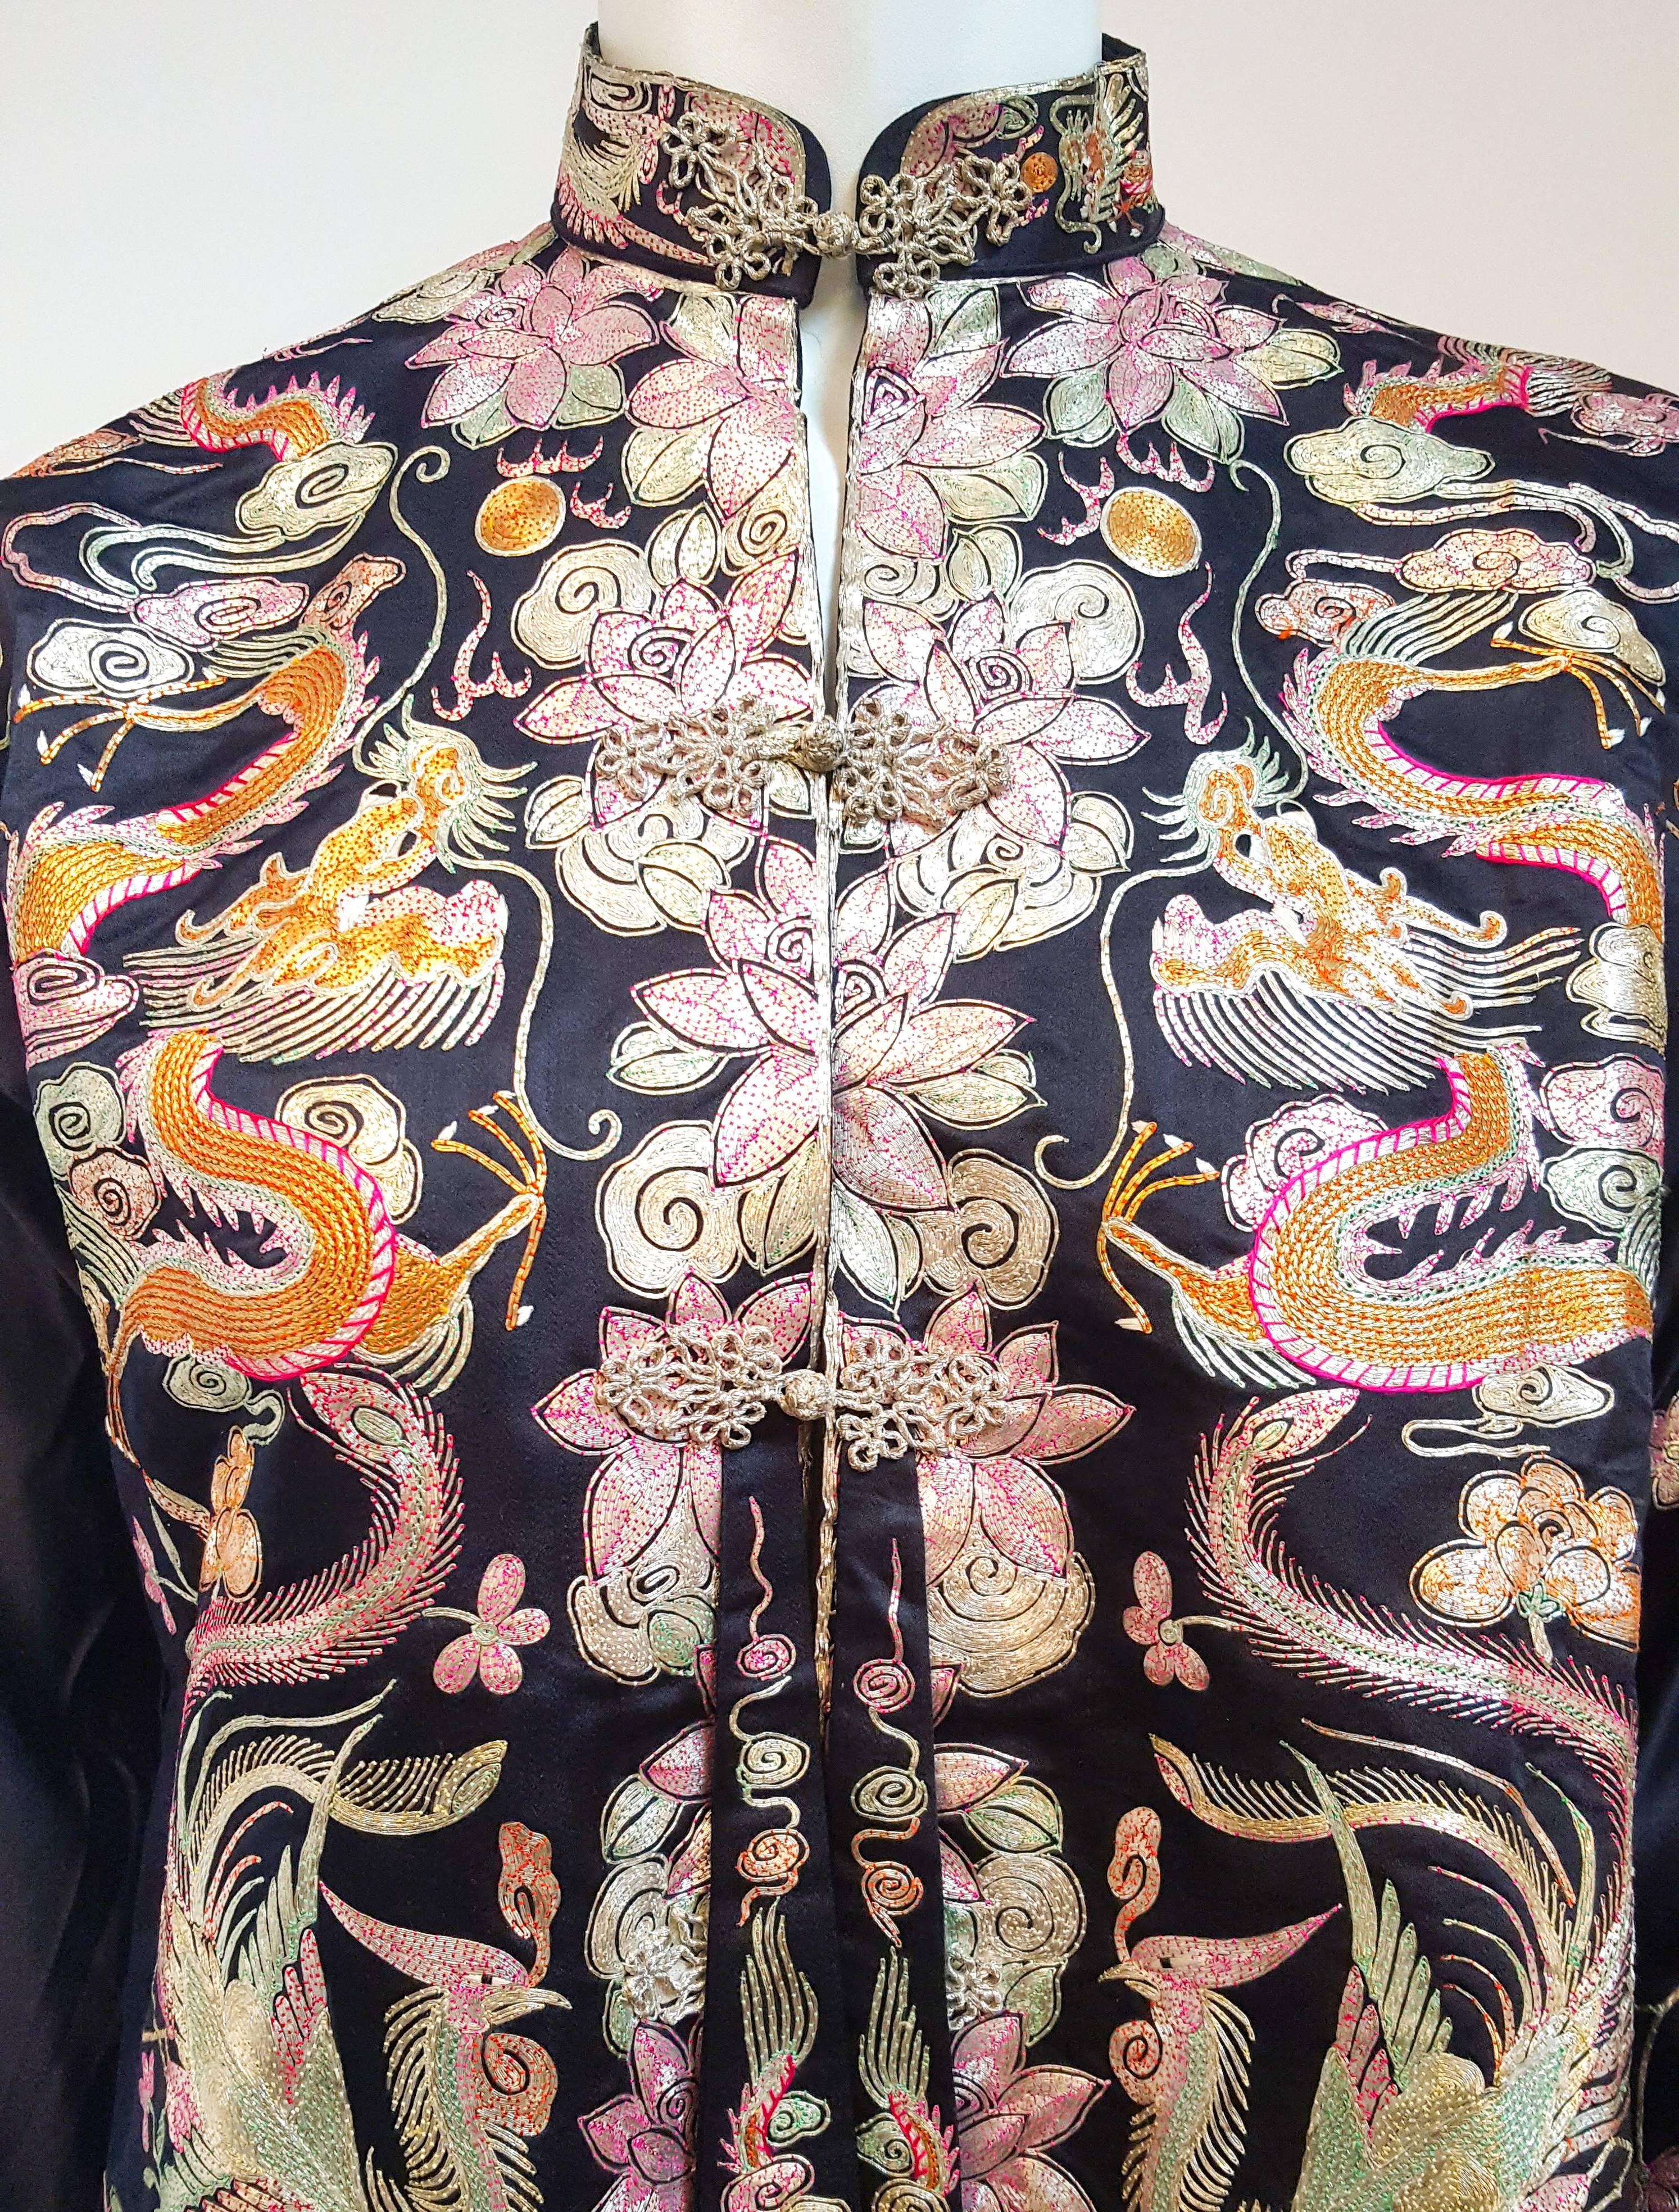 1950s Chinese Silk Top w/ Silver Metallic Embroidery. Dragon and Phoenix motif. Frog clasps down center front. Dolman sleeves. Lined in pink silk. 